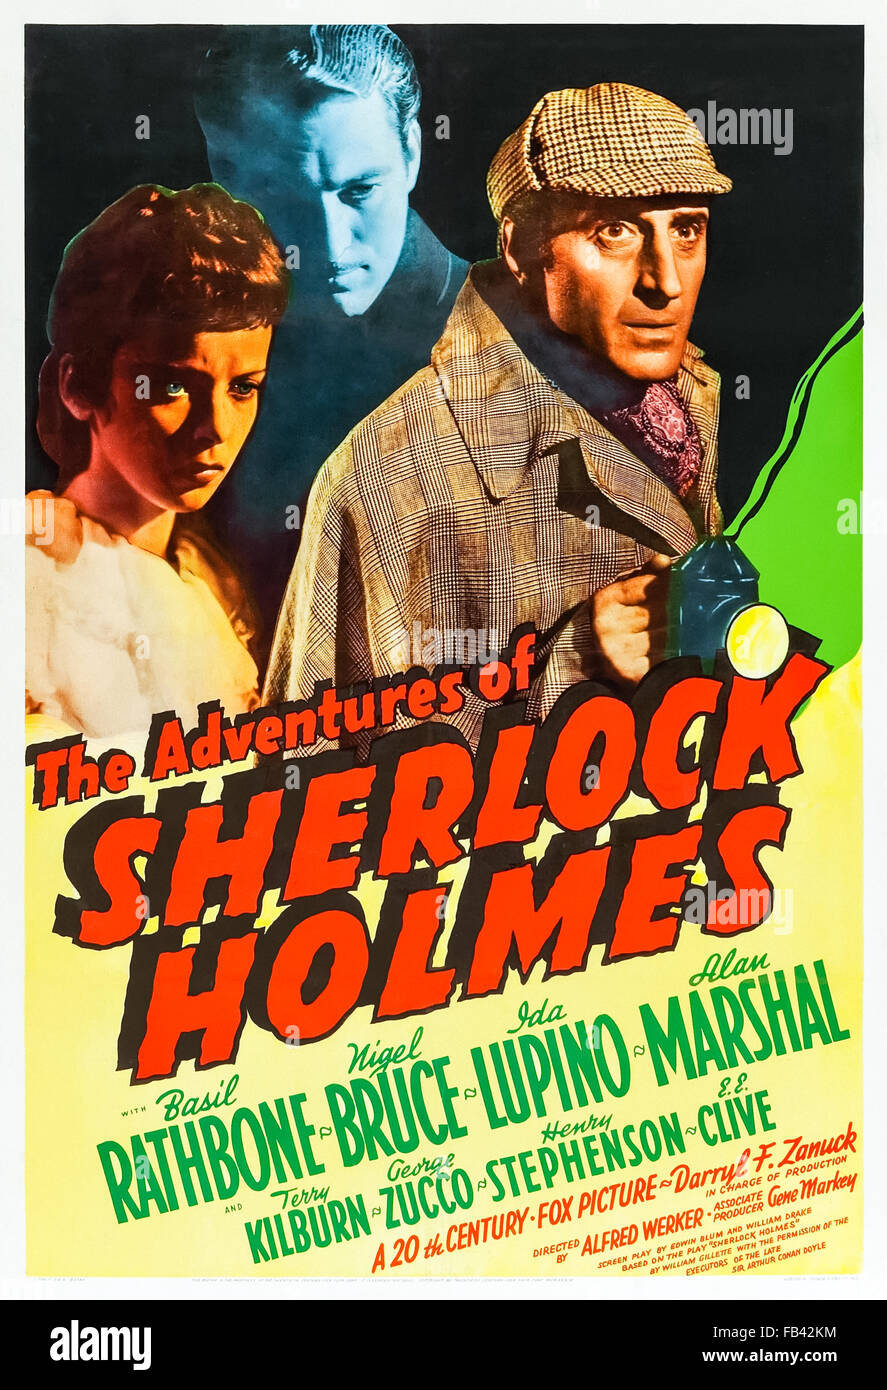 Poster for 'The Adventures Of Sherlock Holmes' 1939  Sherlock Holmes film directed by Alfred L. Werker and starring Basil Rathbone (Holmes); Nigel Bruce (Watson) and Ida Lupino (Ann Brandon). See description for more information. Stock Photo